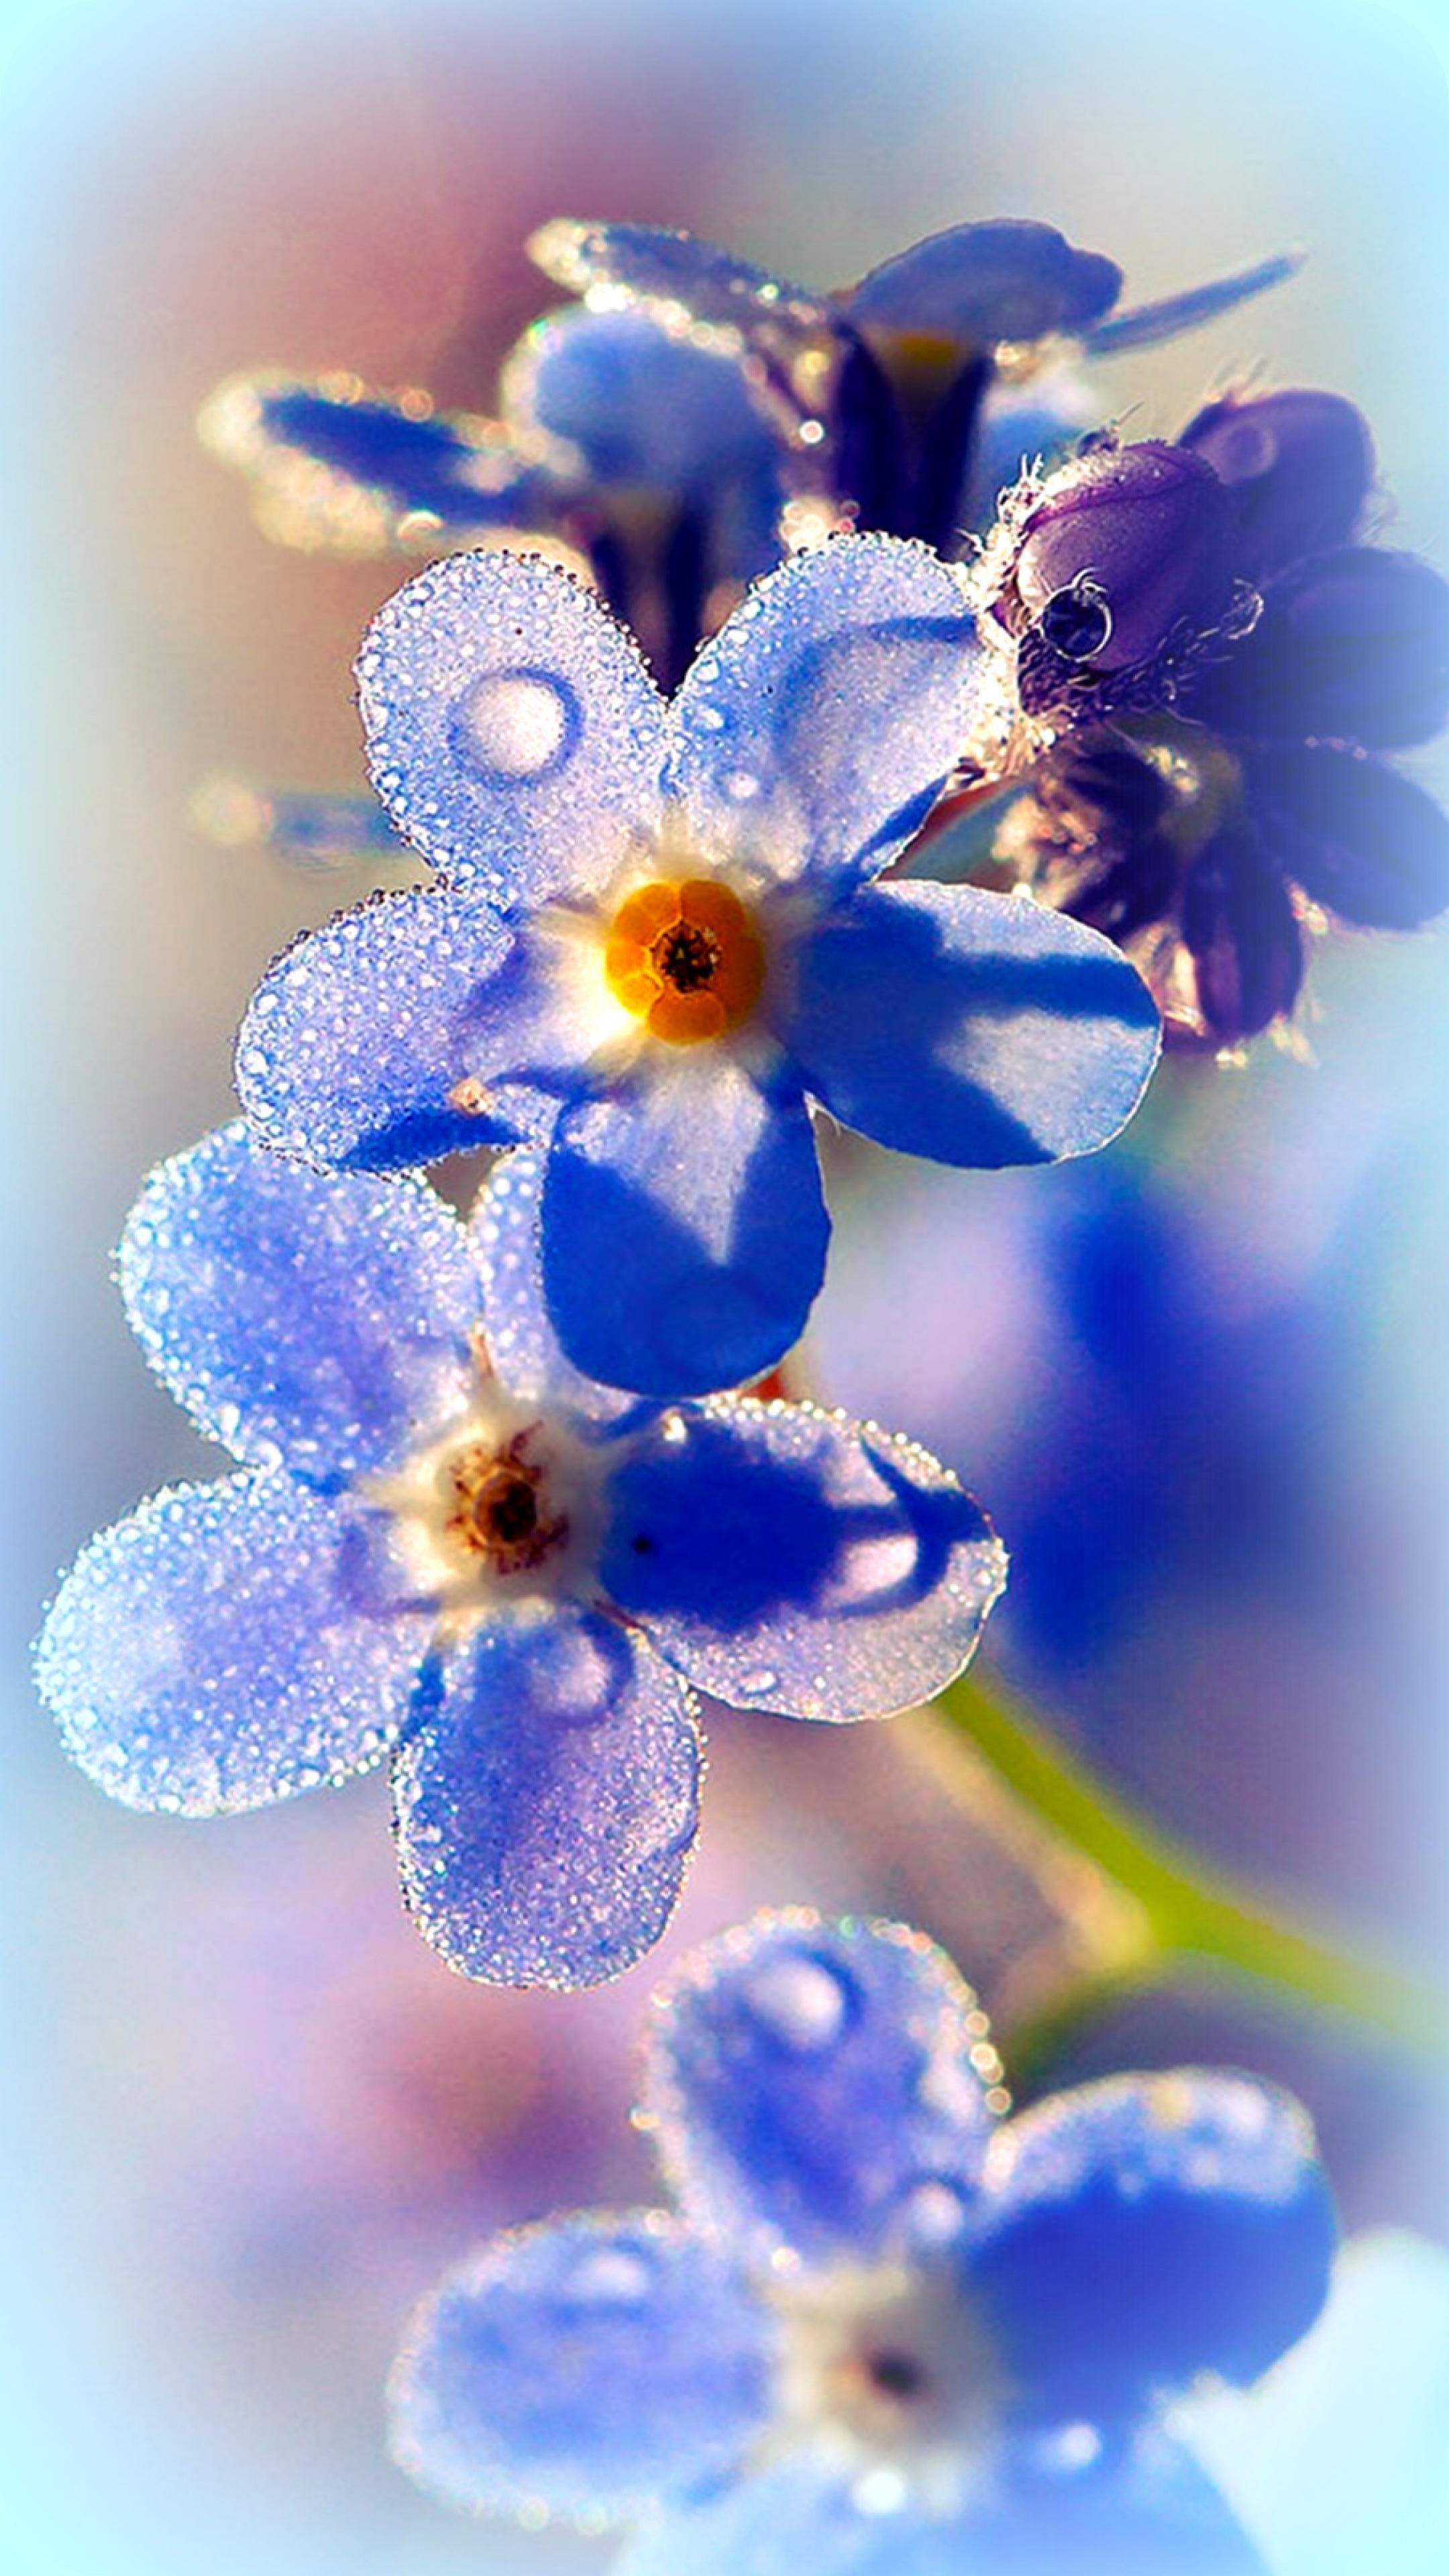 Forget Me Not Flowers Wallpaper